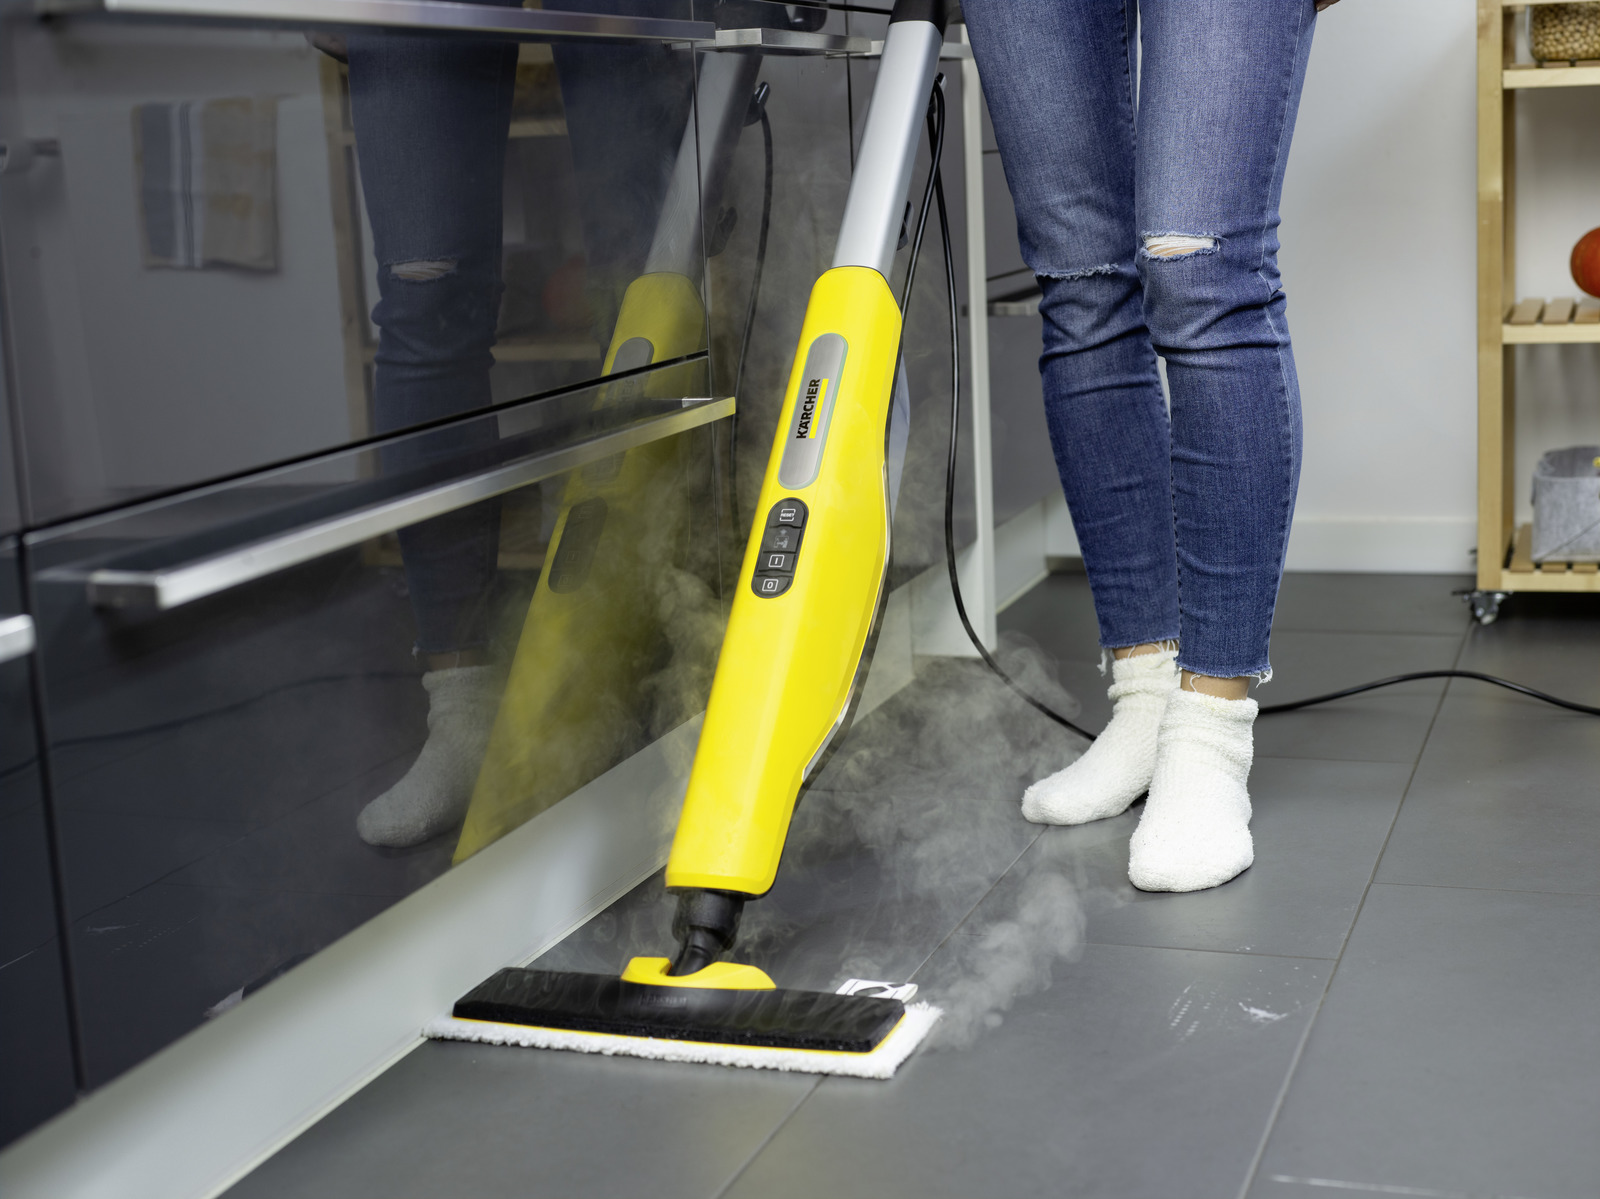 Kärcher FC 7 cordless power mop for a super effortless clean (cleaning  review) - Cybershack